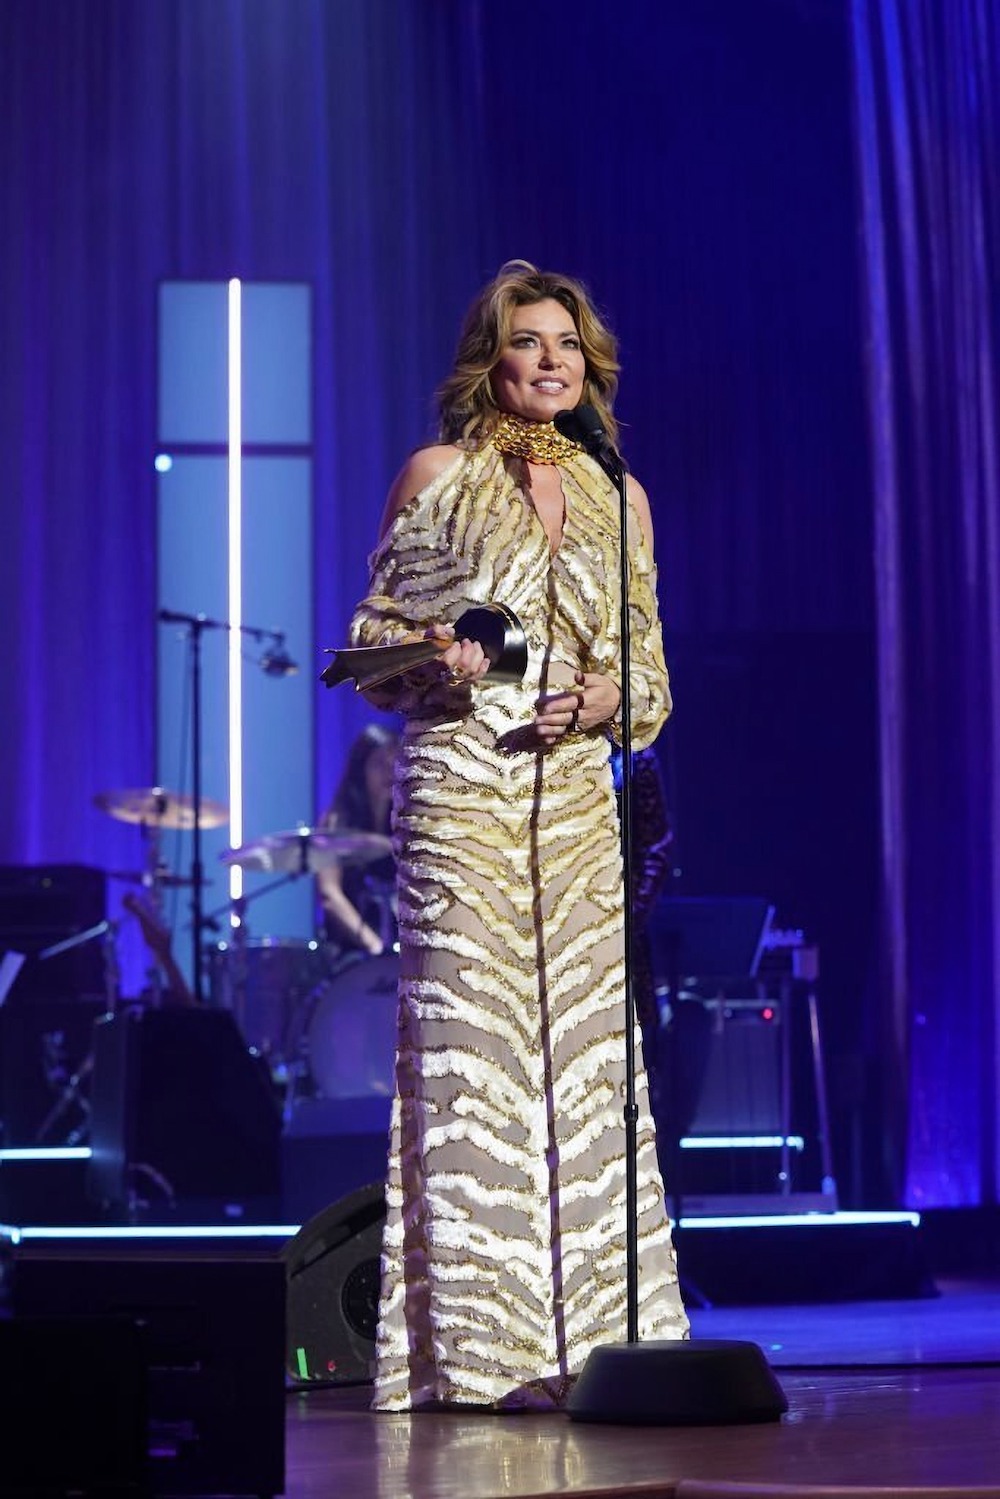 Shania Twain was honored with the ACM Poet’s Award at 2022 Annual Academy Of Country Music Honors.